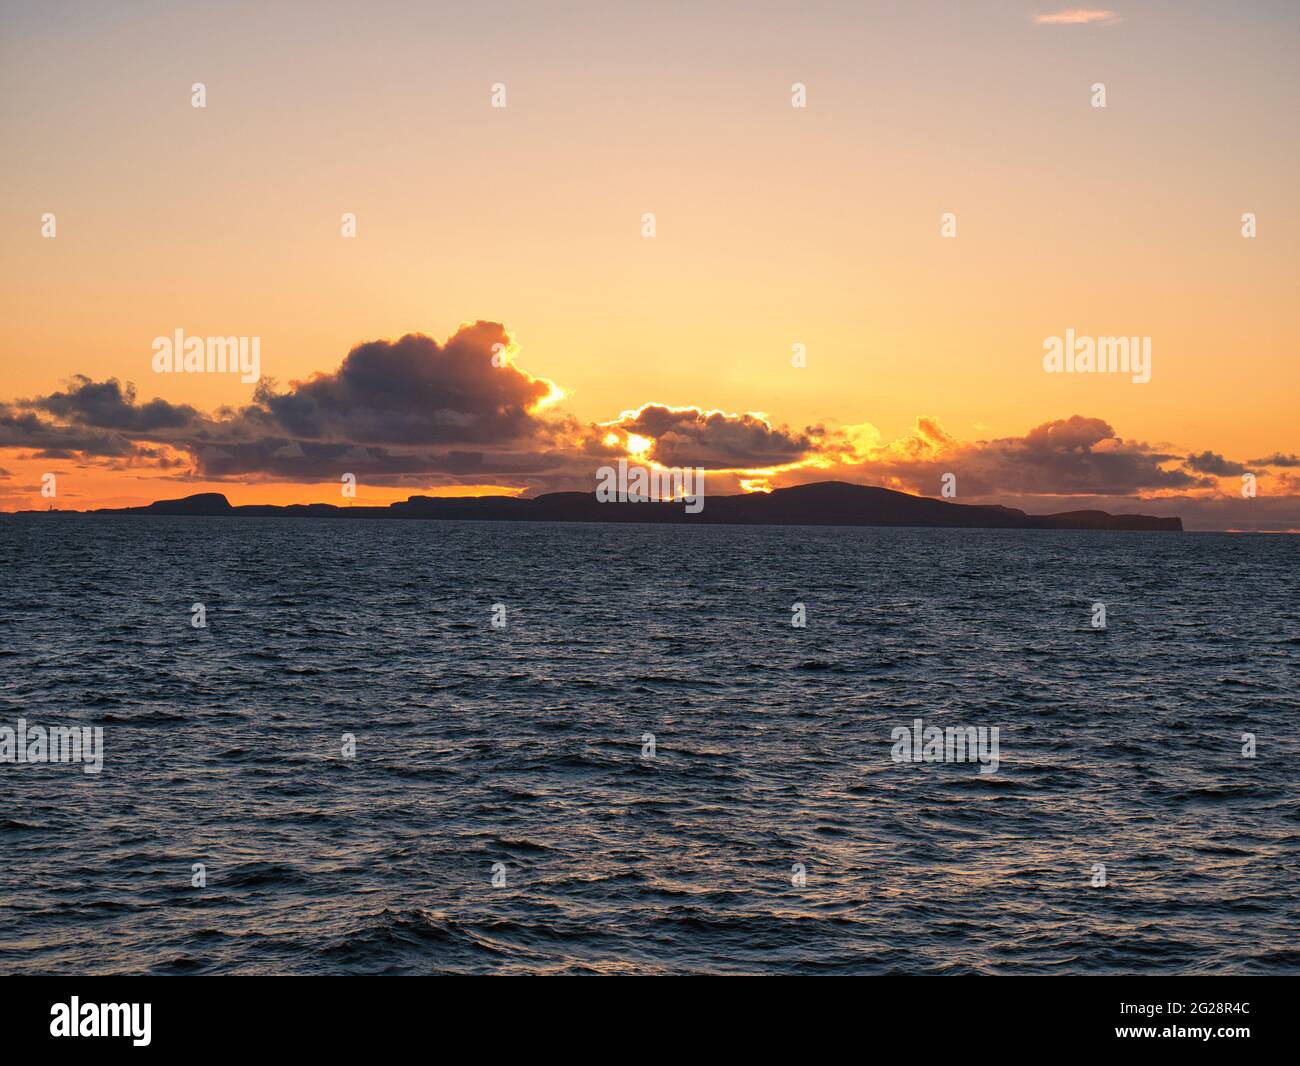 Sunset over the island of Fair Isle, part of the Shetland archipelago in the north of the UK. Taken on a sunny evening from the ferry travelling from Stock Photo